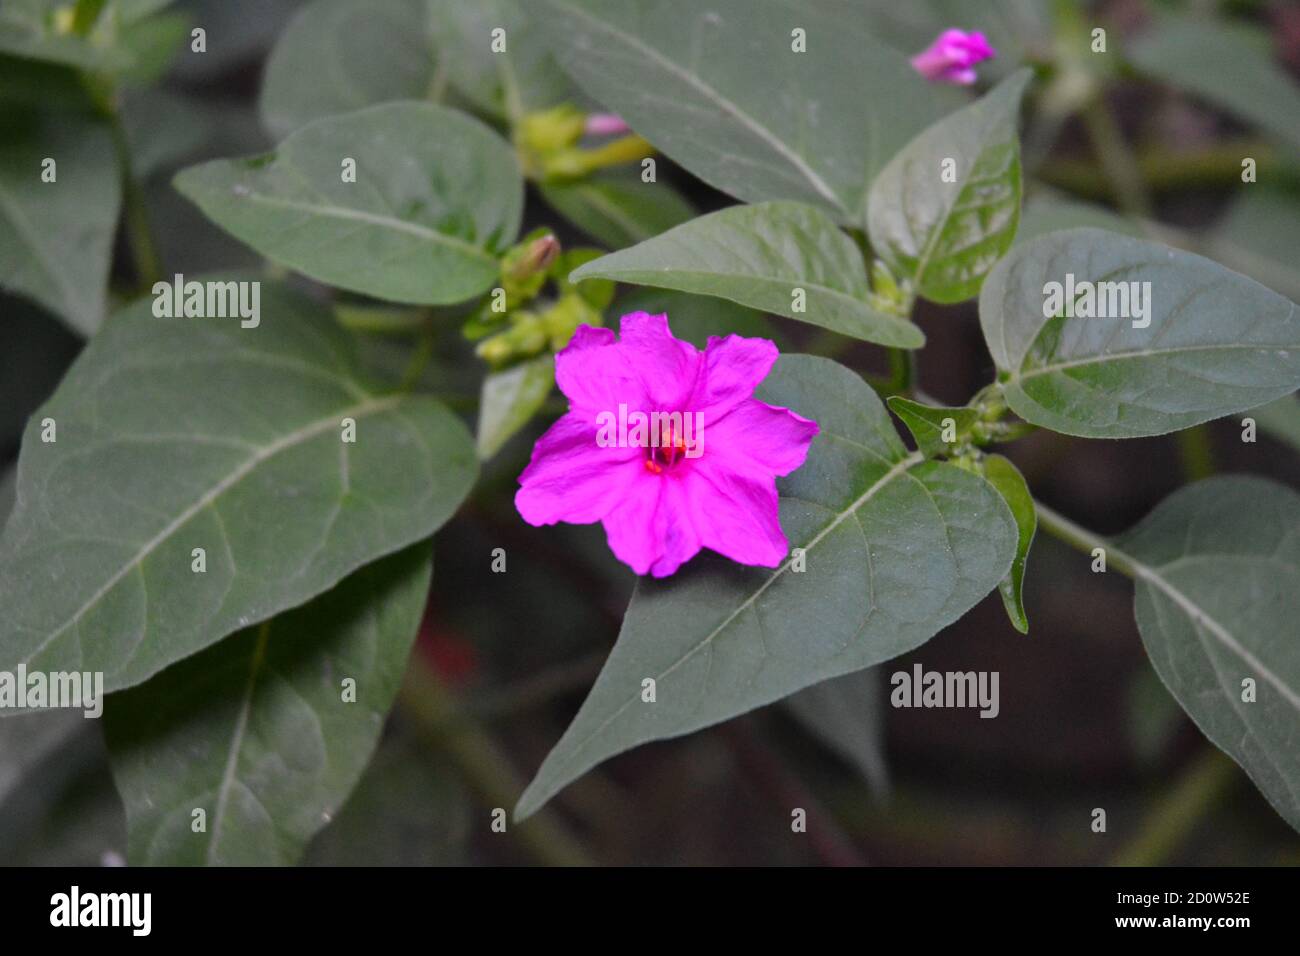 pink mirabilis flowers in a garden with green leaves looks beautiful. Stock Photo